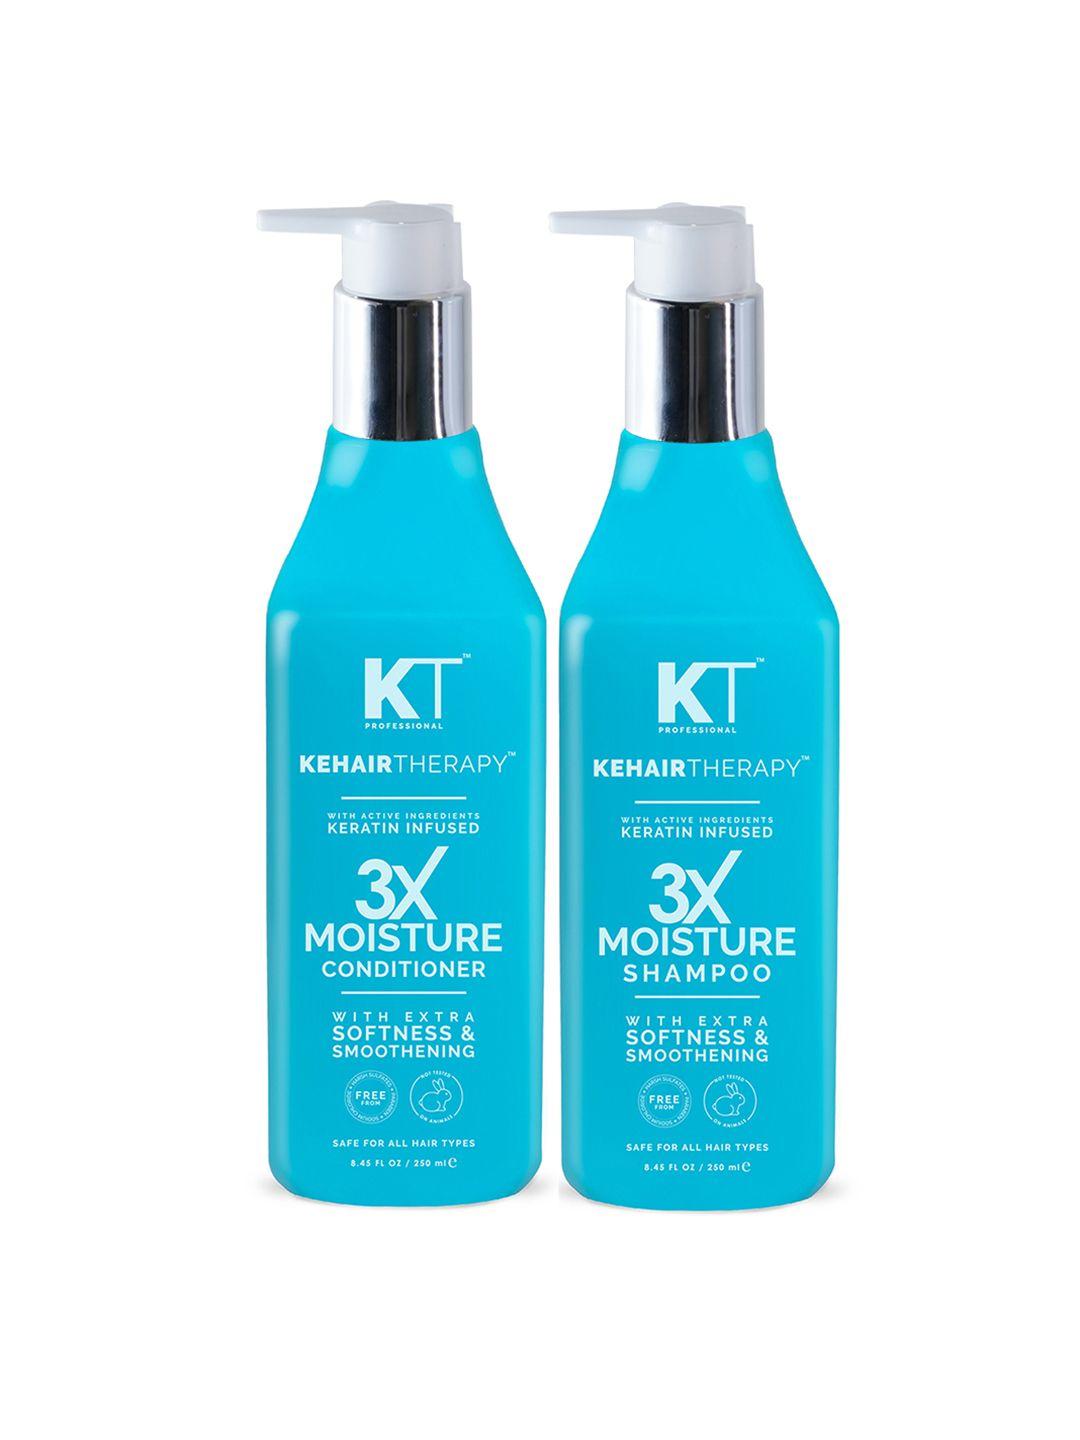 kehairtherapy set of 2 3x moisture shampoo & conditioner to increase moisture level-500ml